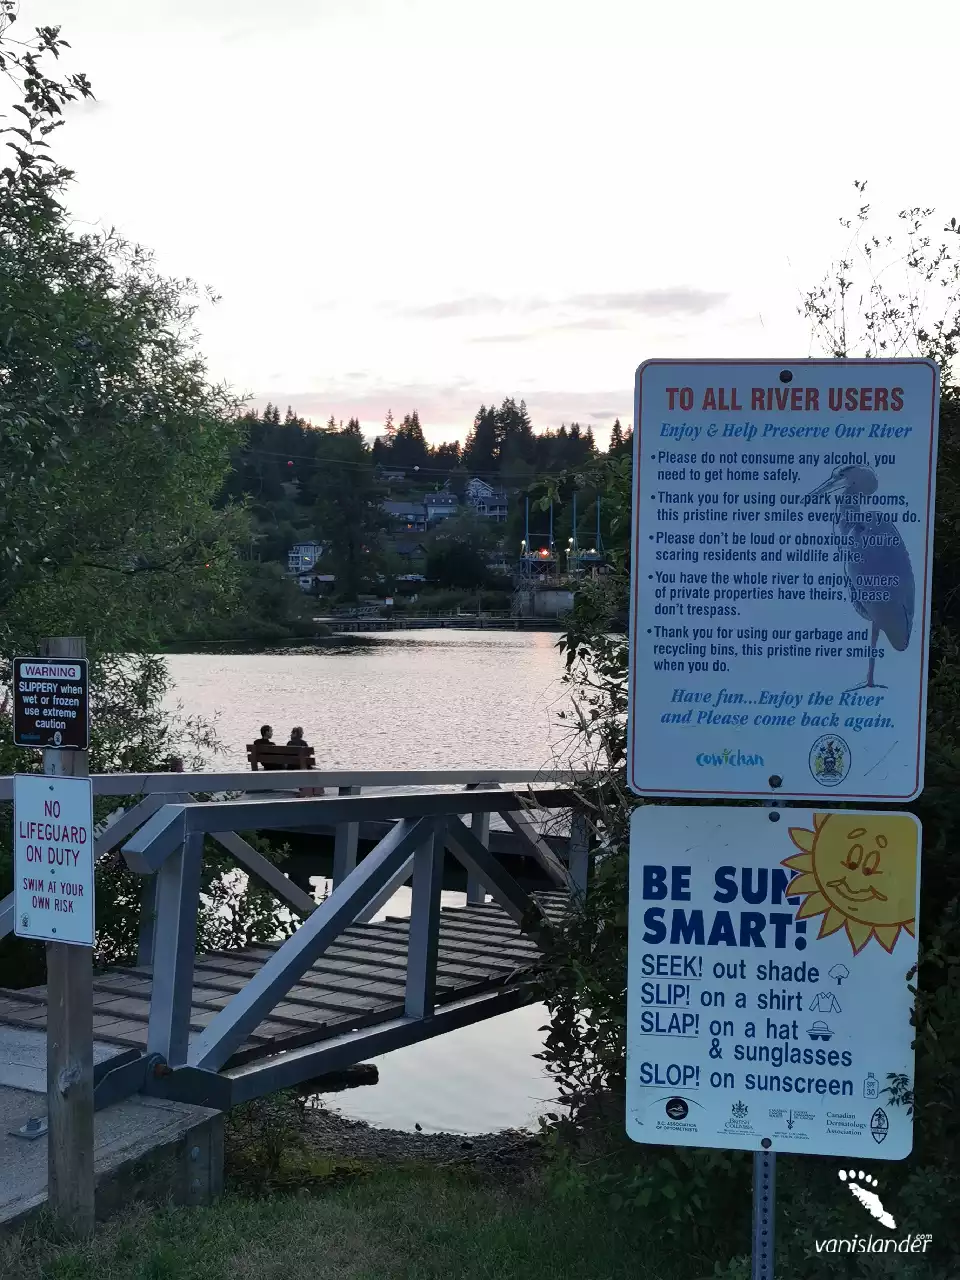 River caution board for users around Cowichan Lake, Vancouver Island